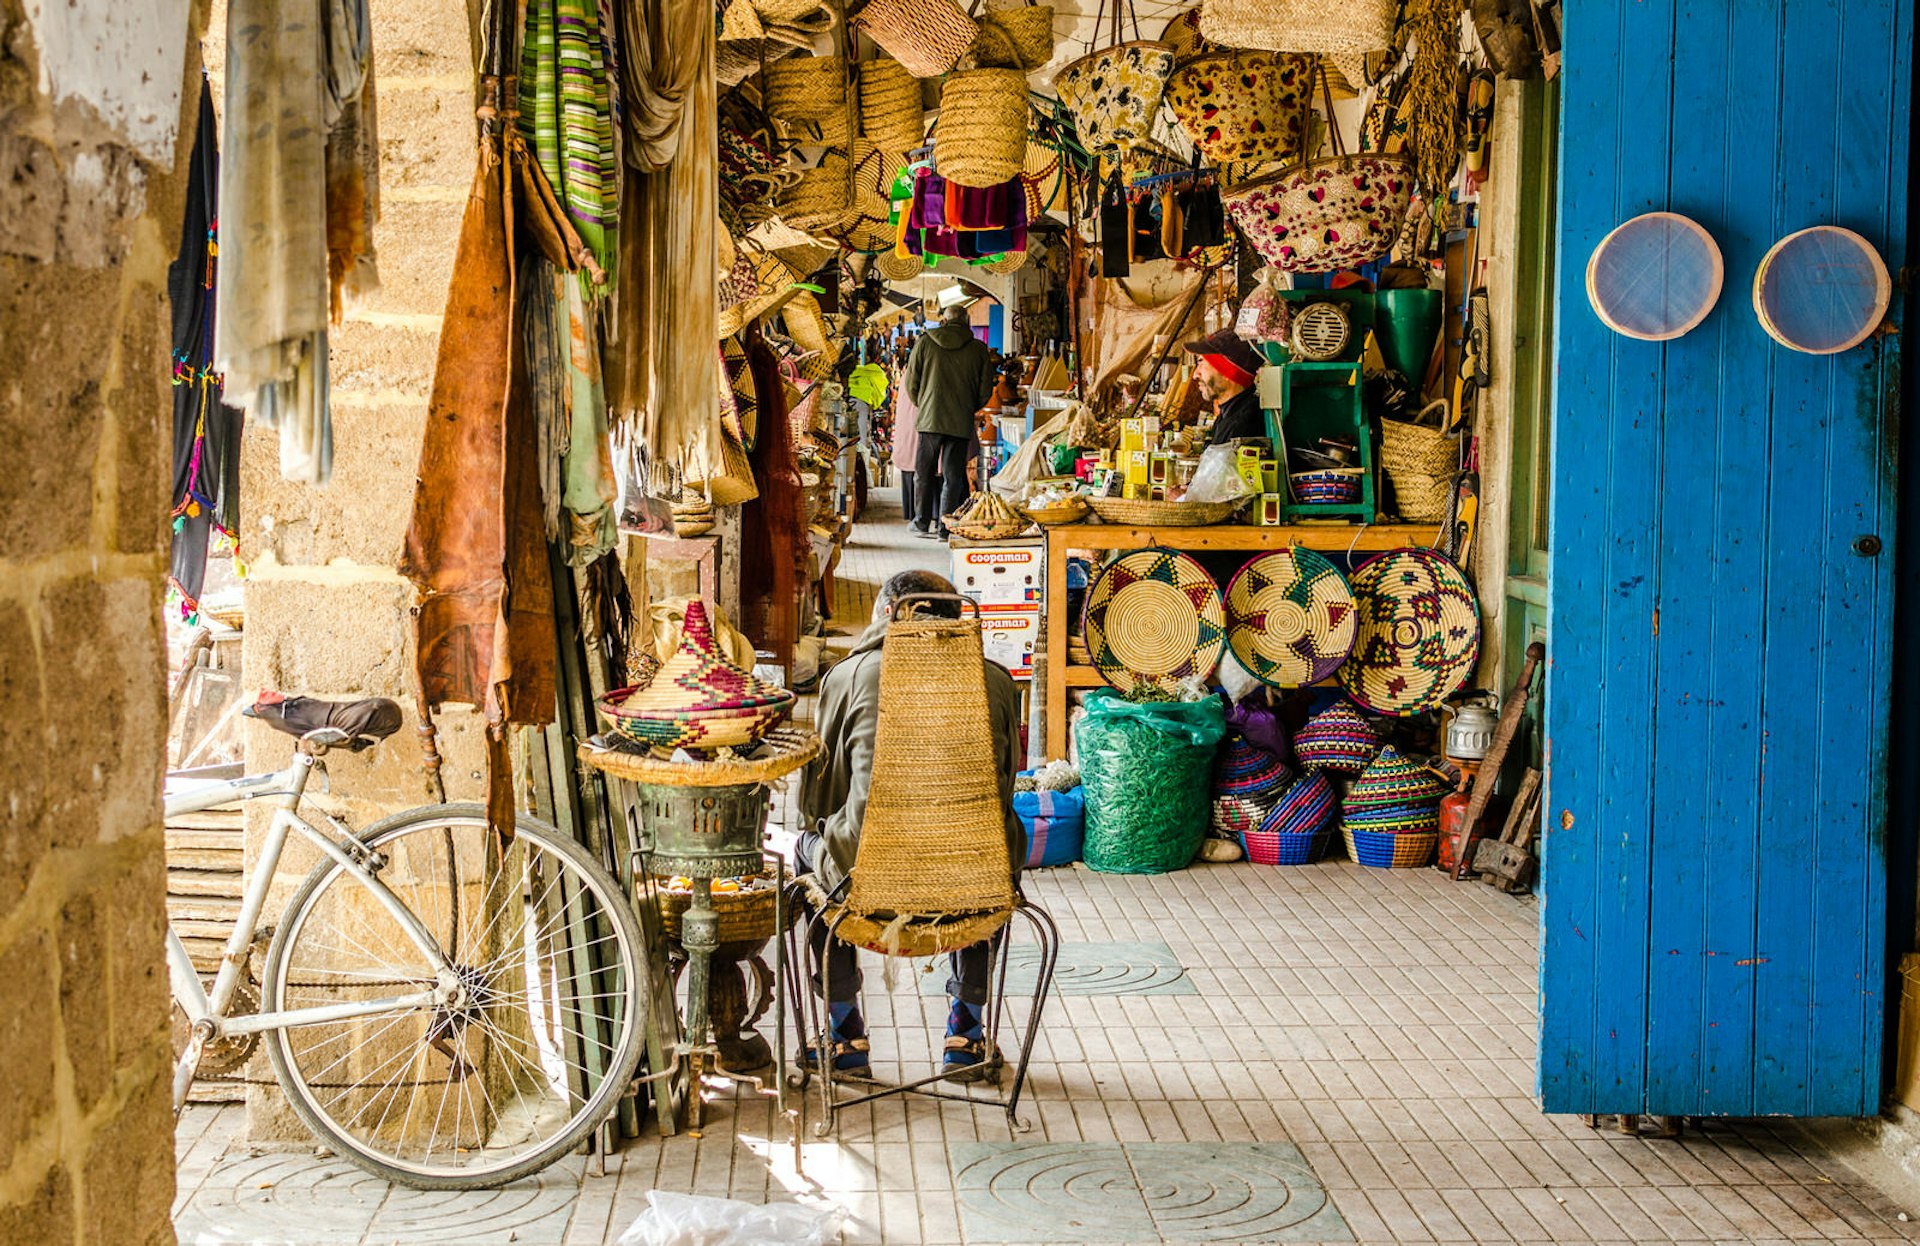 Handicrafts shop, Essaouira, Morocco. Image by Federica Gentile / Getty Images